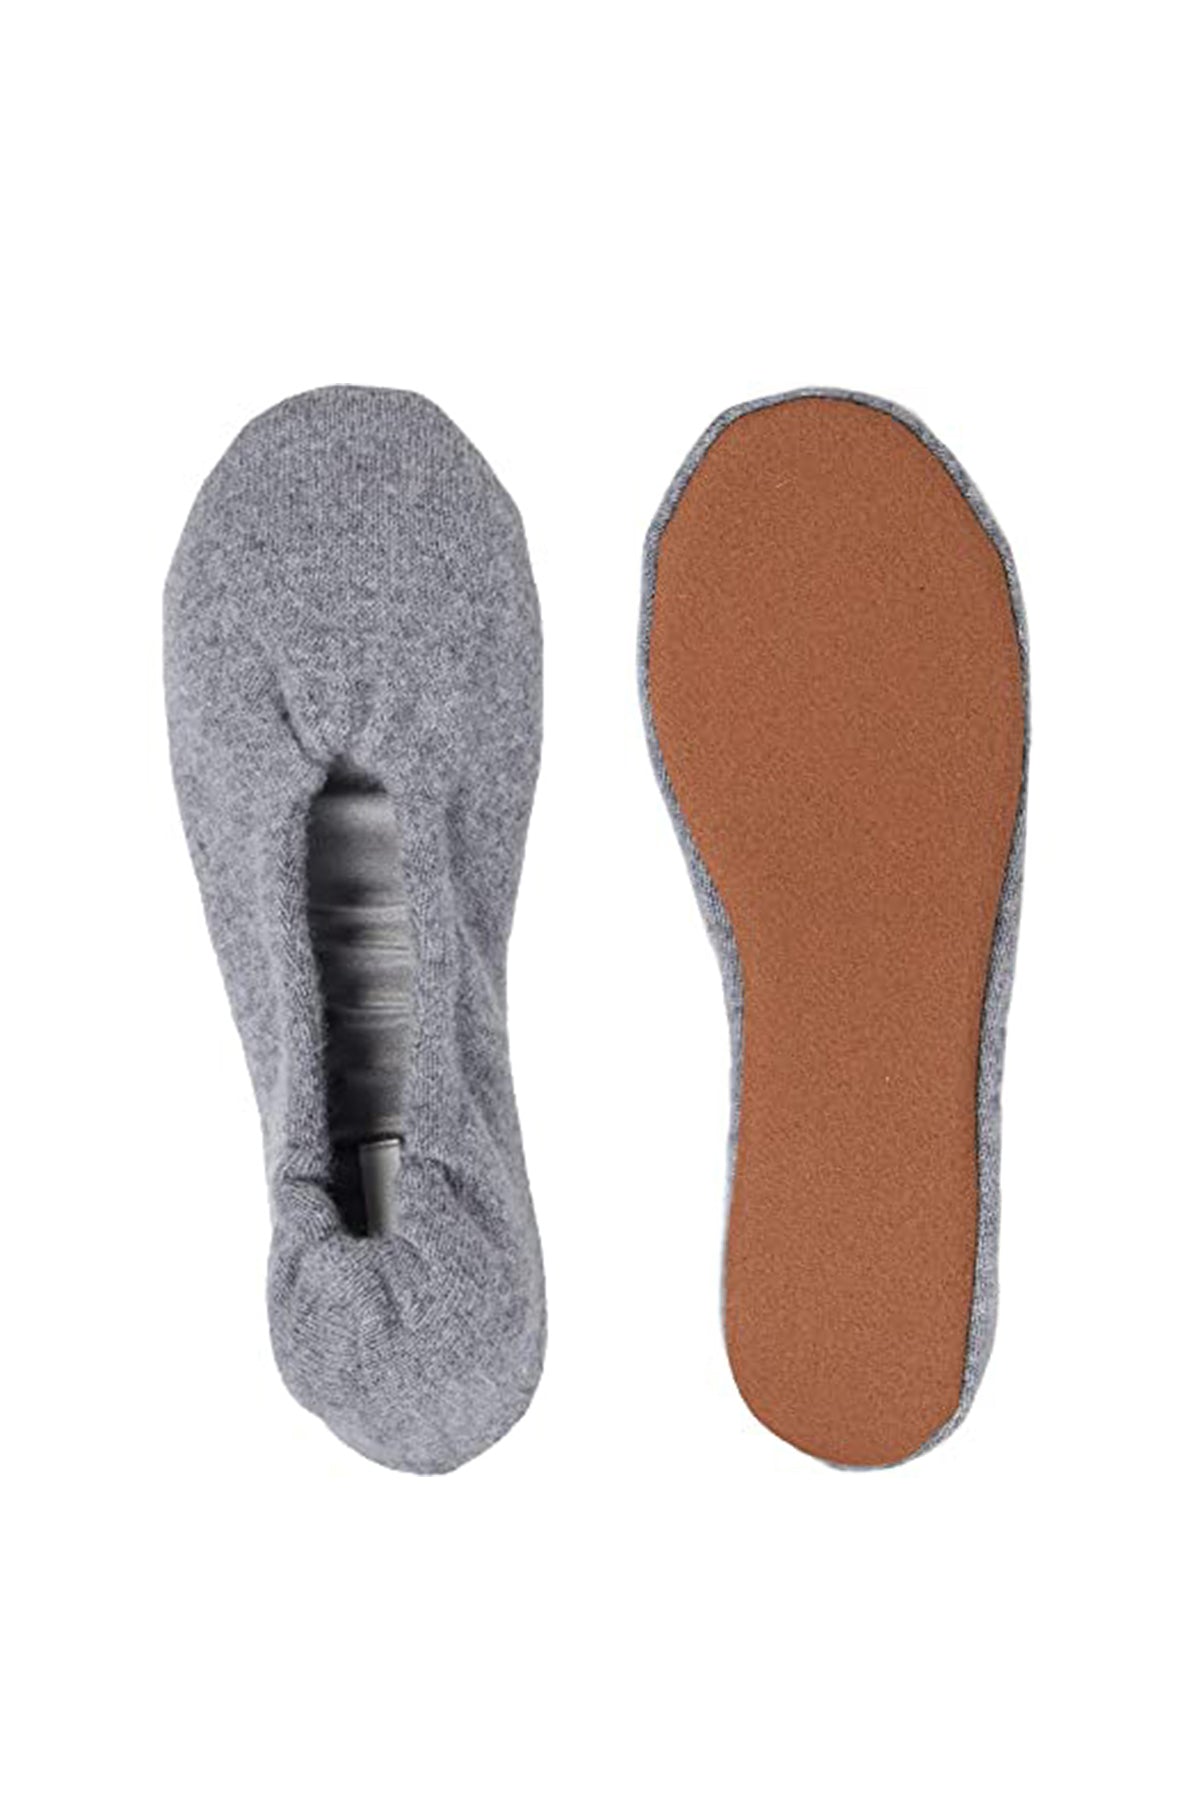   A pair of Cashmere Ballet Flat Slippers by Skin in timeless and enduring grey color on a white surface. 